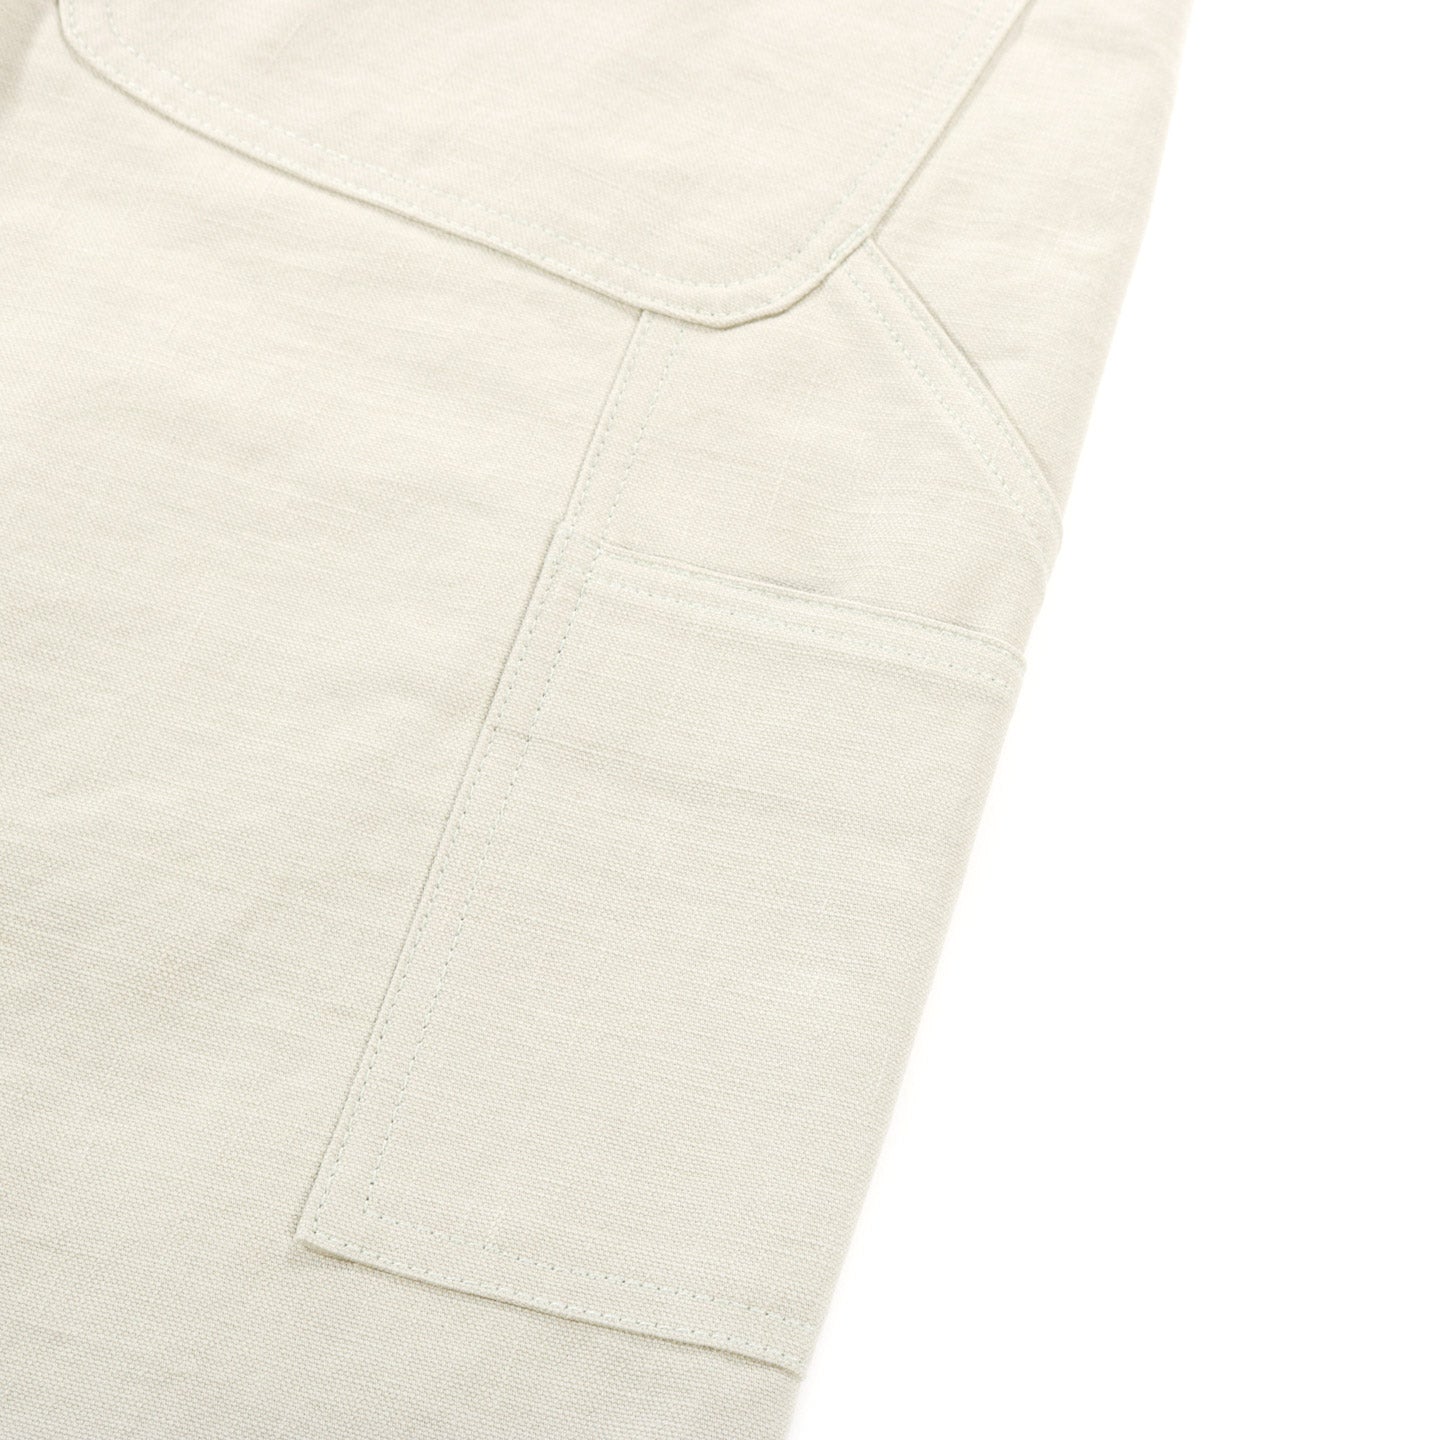 AURALEE WASHED HEAVY CANVAS PANTS IVORY